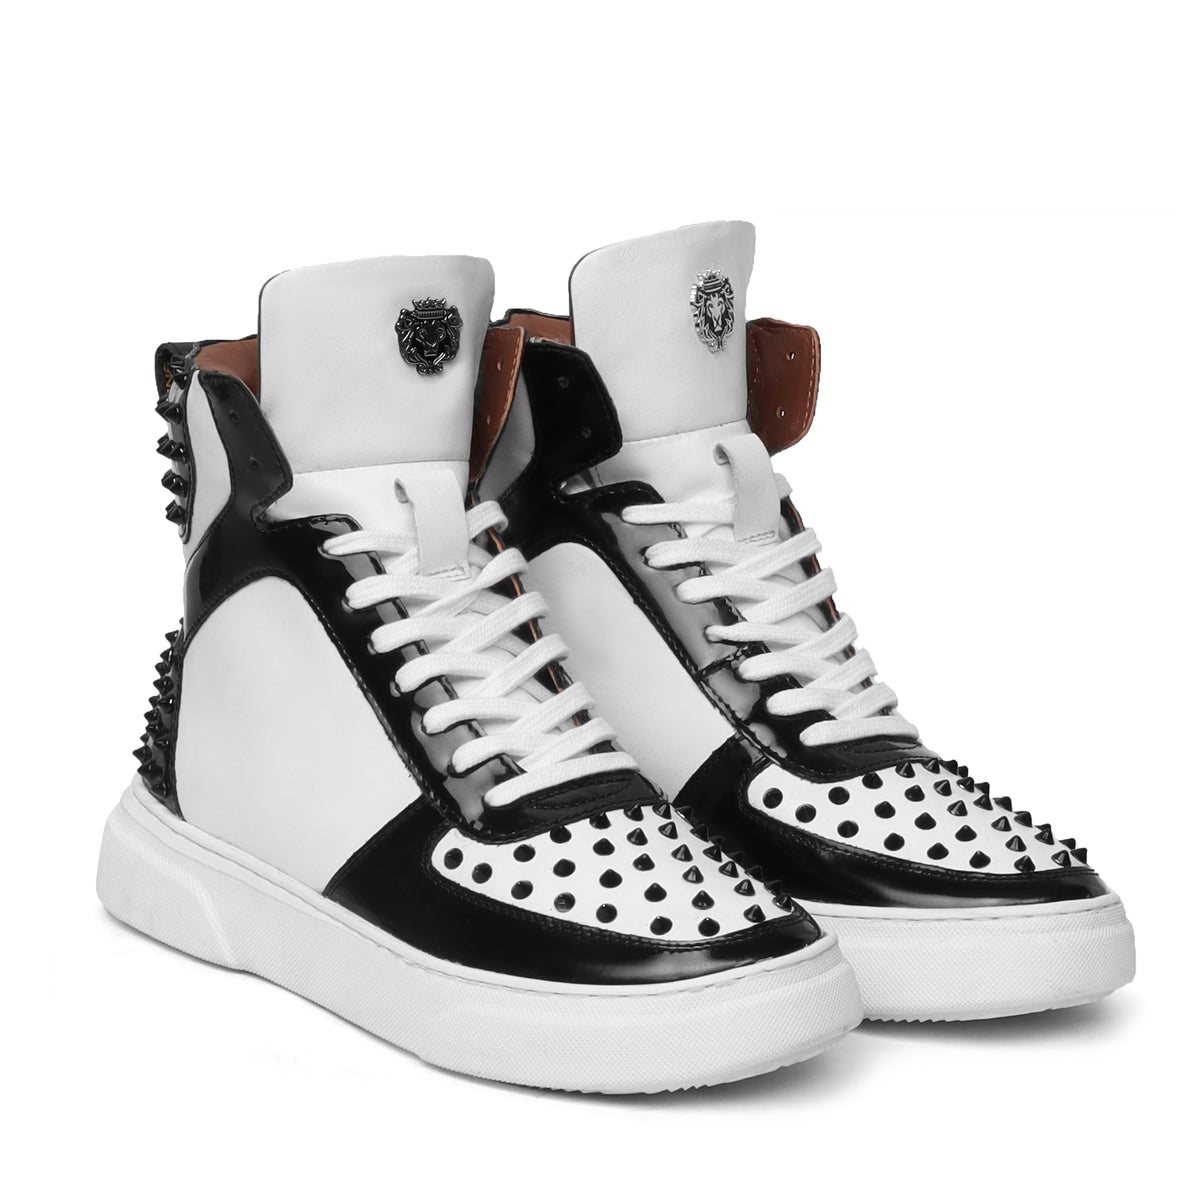 Studded Toe and Counter Black Patent Leather detailing White High Top Sneakers By Brune & Bareskin